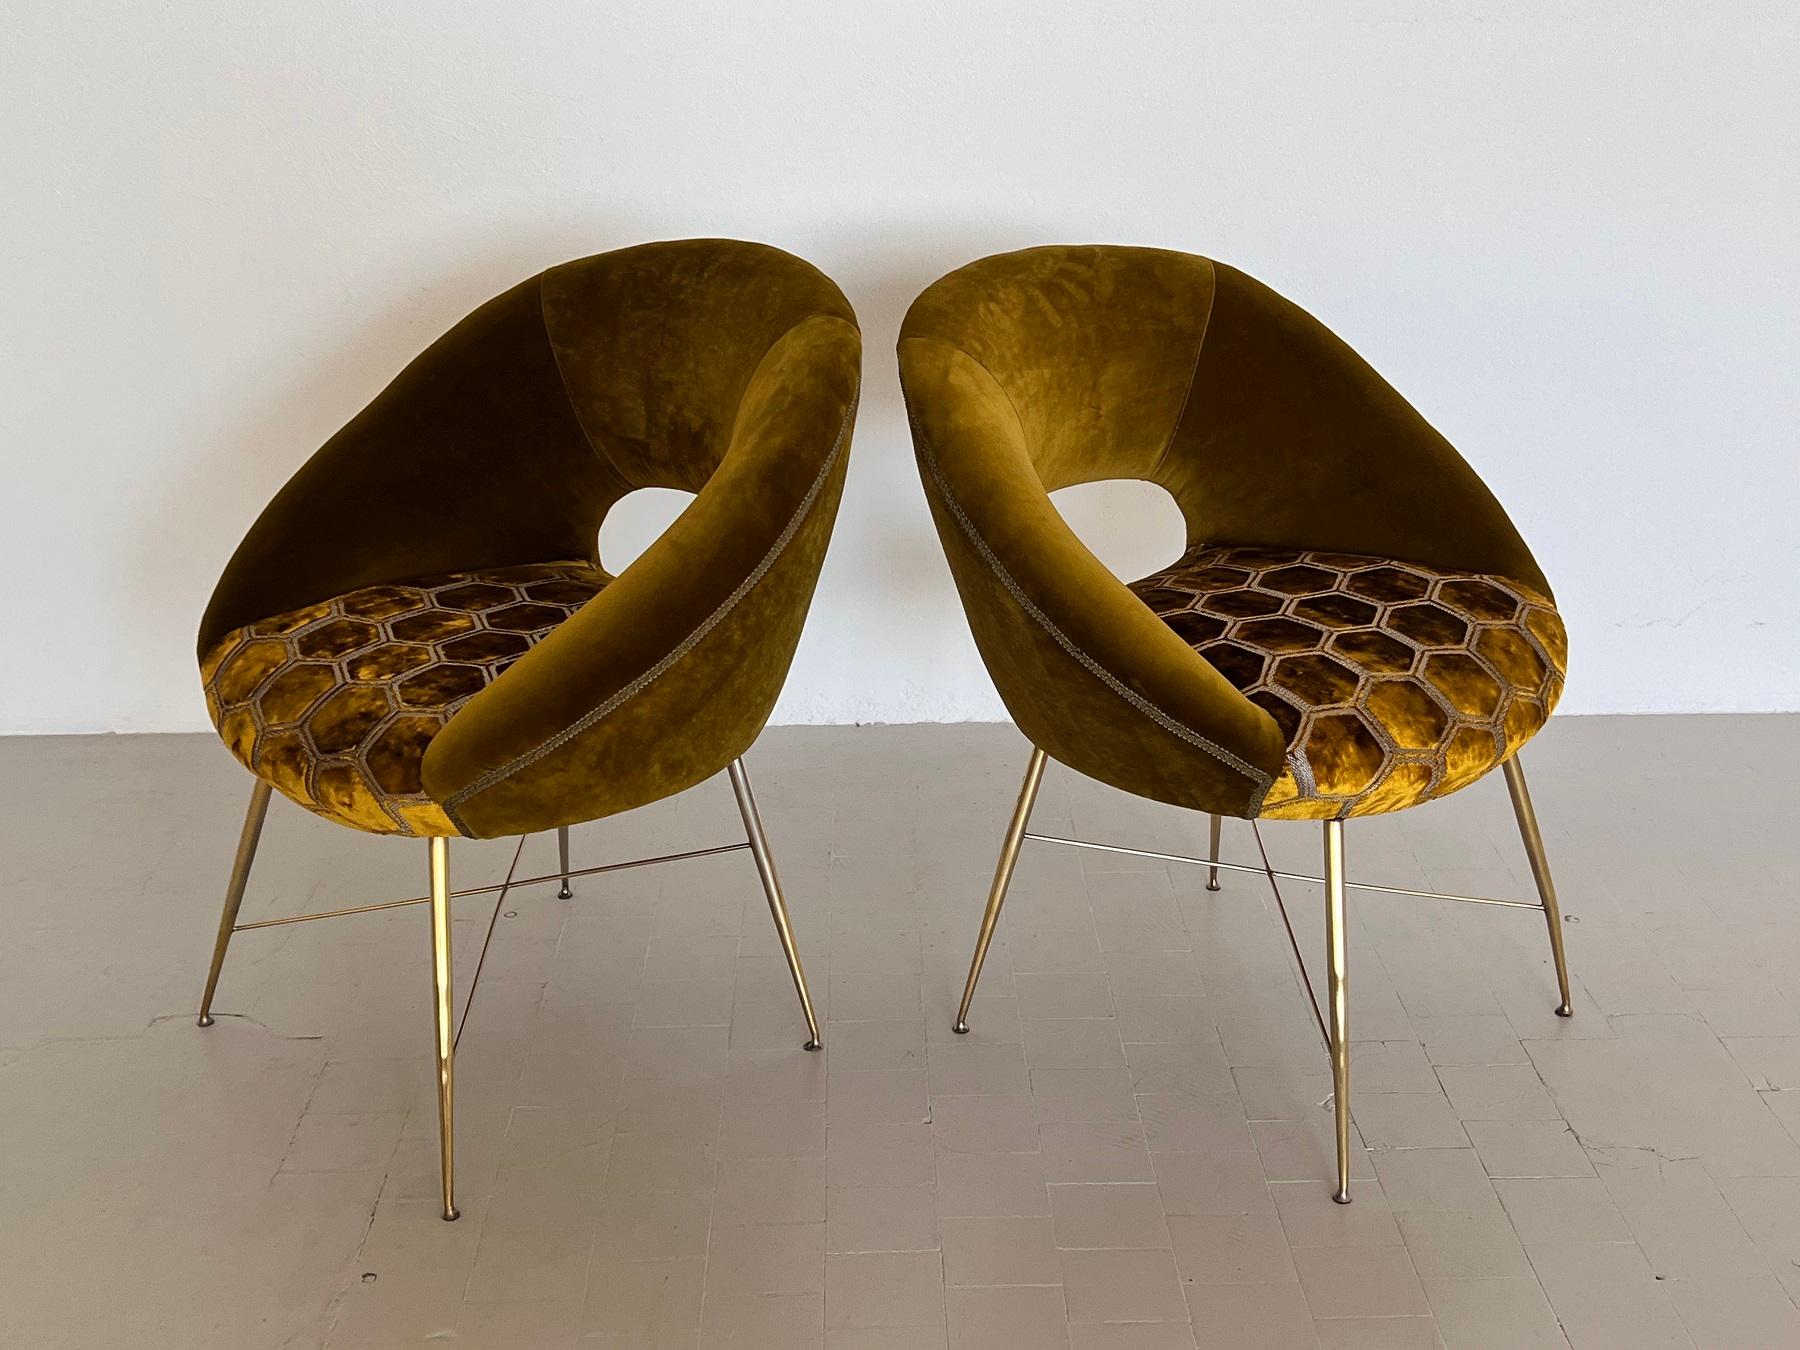 Silvio Cavatorta Pair of Chairs with Brass Legs Re-upholstered in Velvet, 1950s For Sale 4